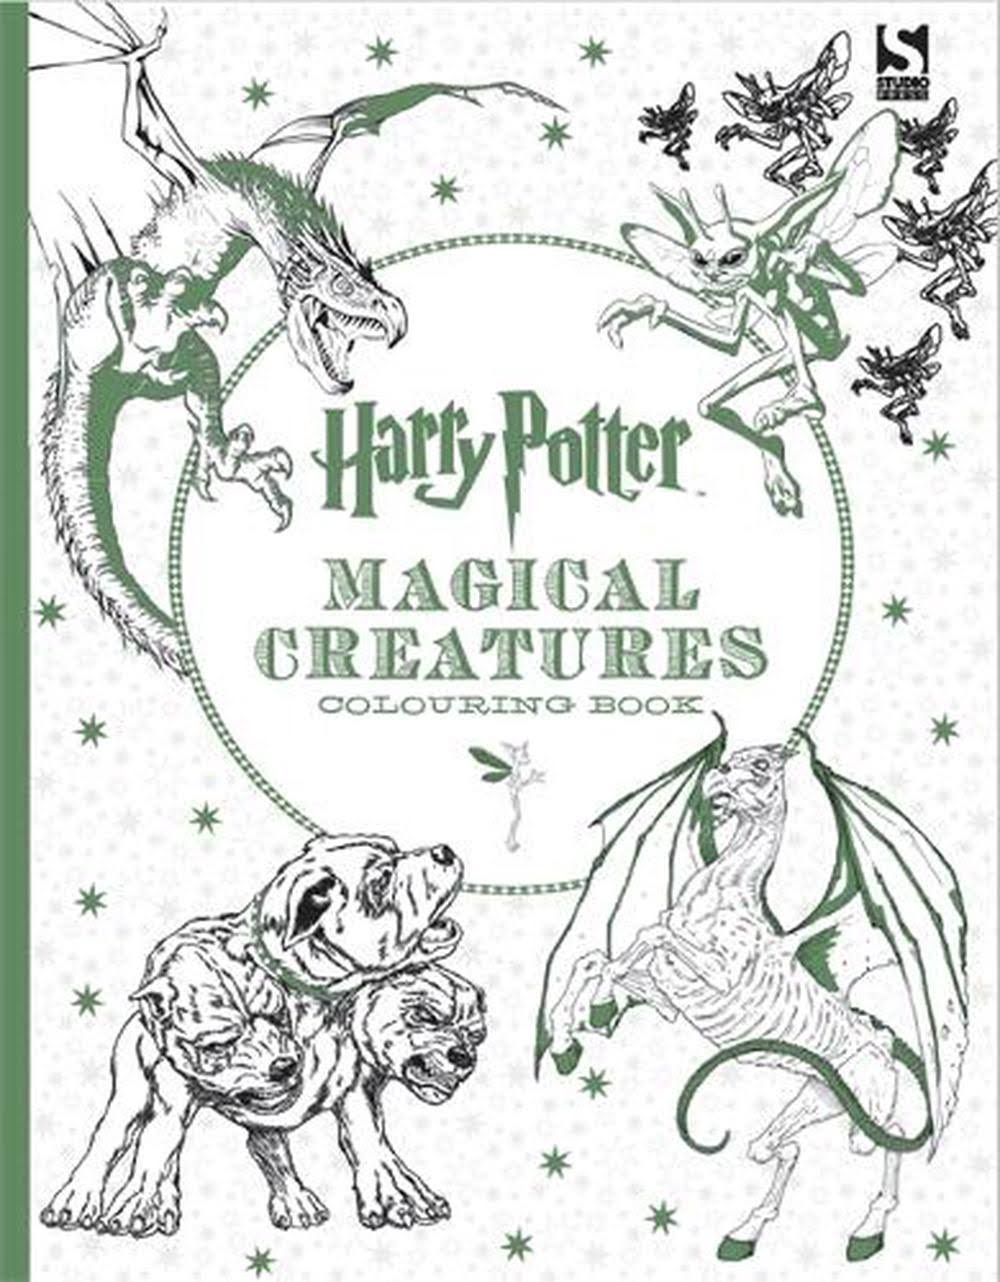 Harry Potter Magical Creatures Colouring Book - Warner Brothers